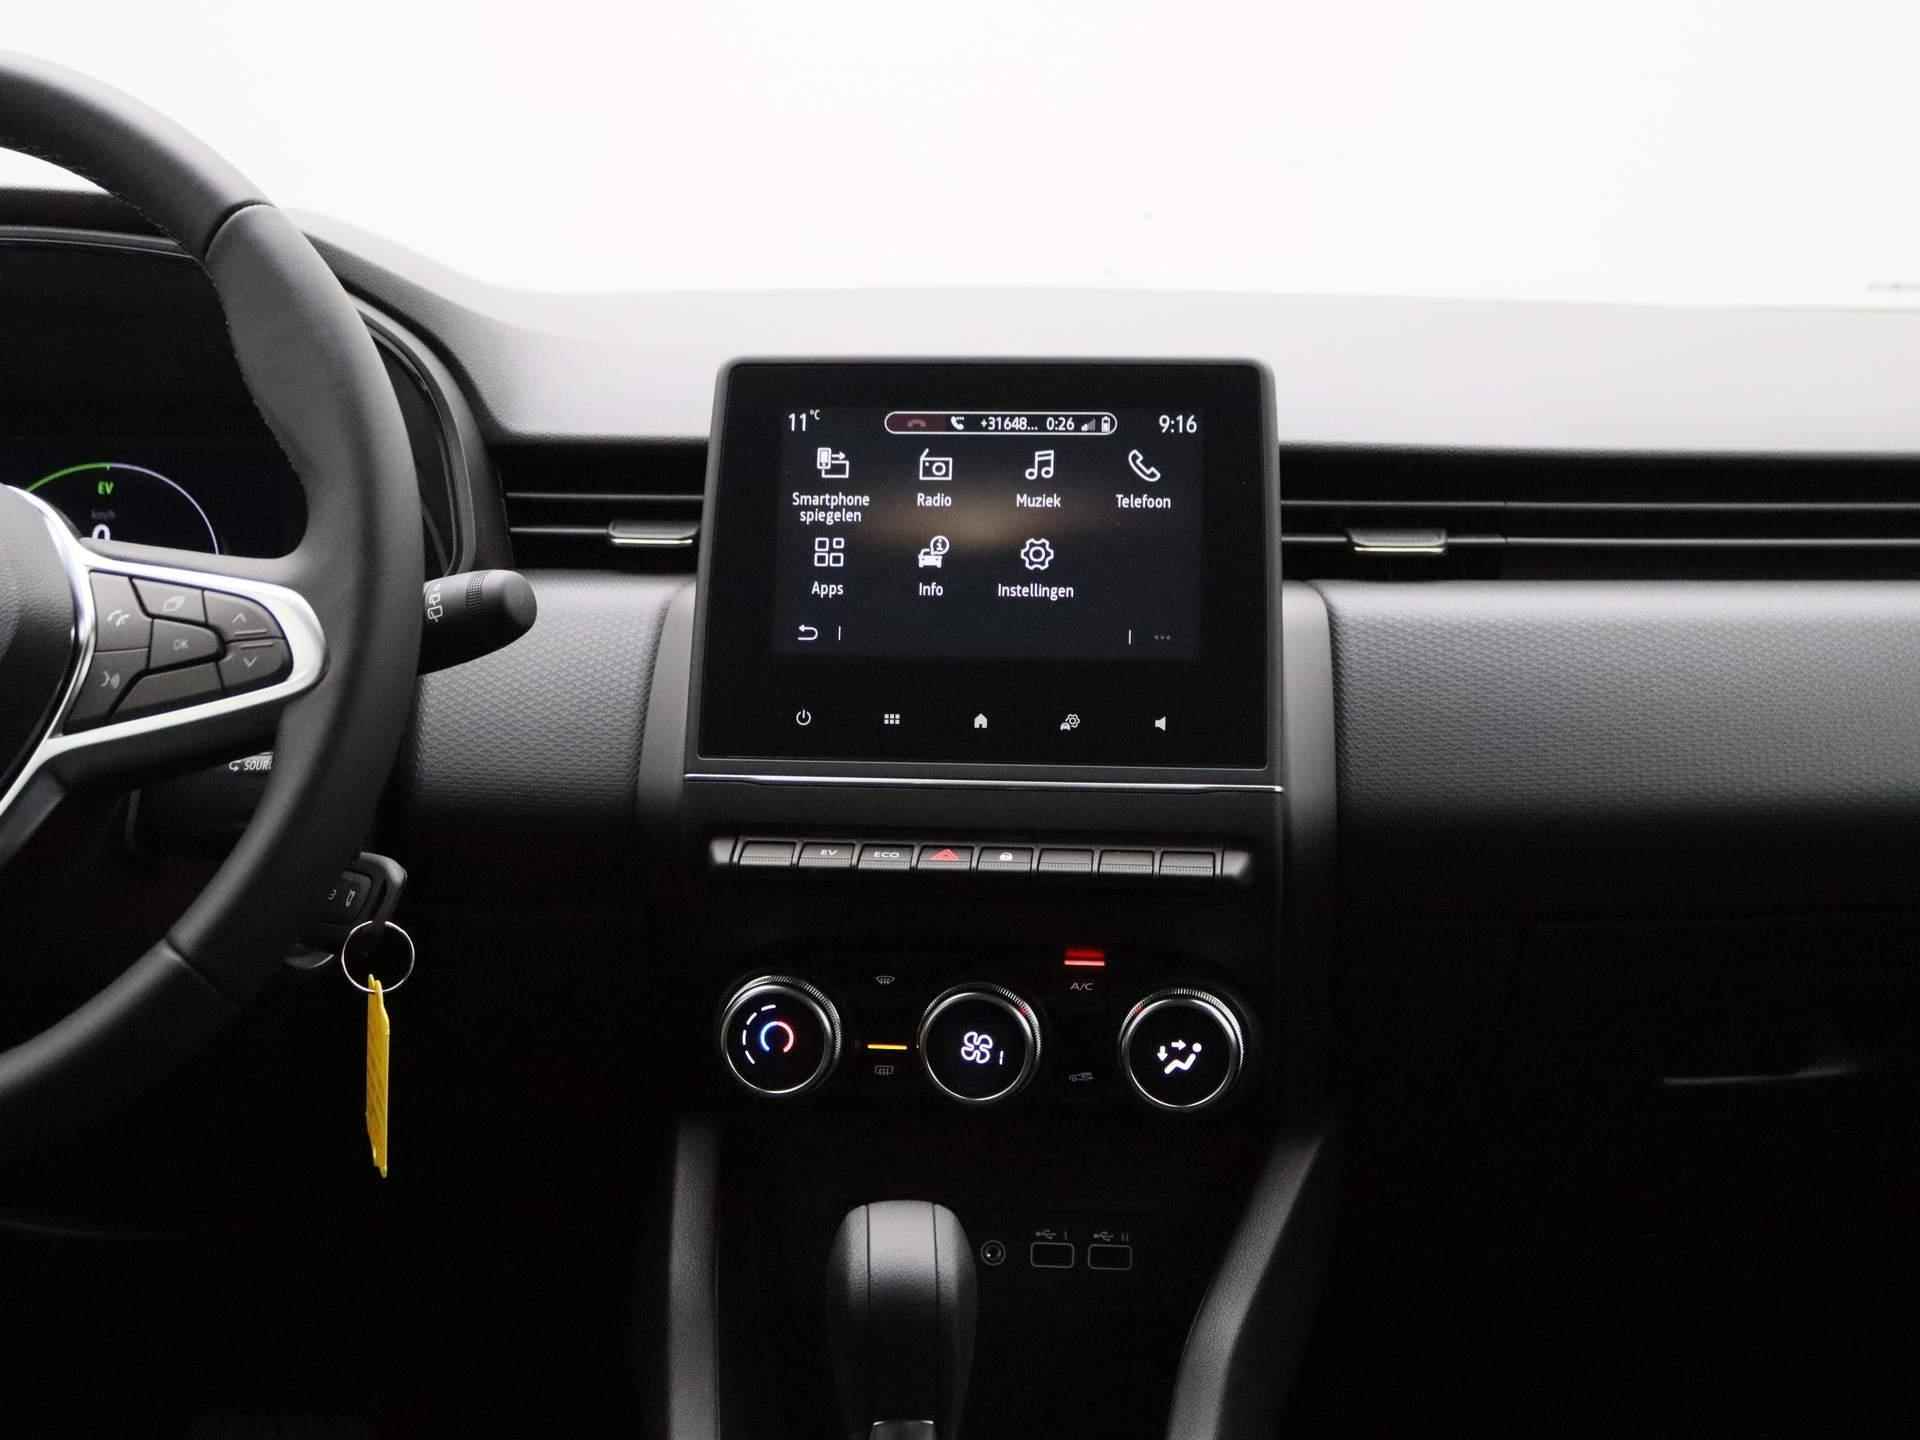 Renault Clio 1.6 E-Tech Full Hybrid 145 Equilibre | PDC Achter | Airconditioning | Draadloze Apple Carplay & Android Auto | Cruise Control | Licht- en regensensor - 9/36